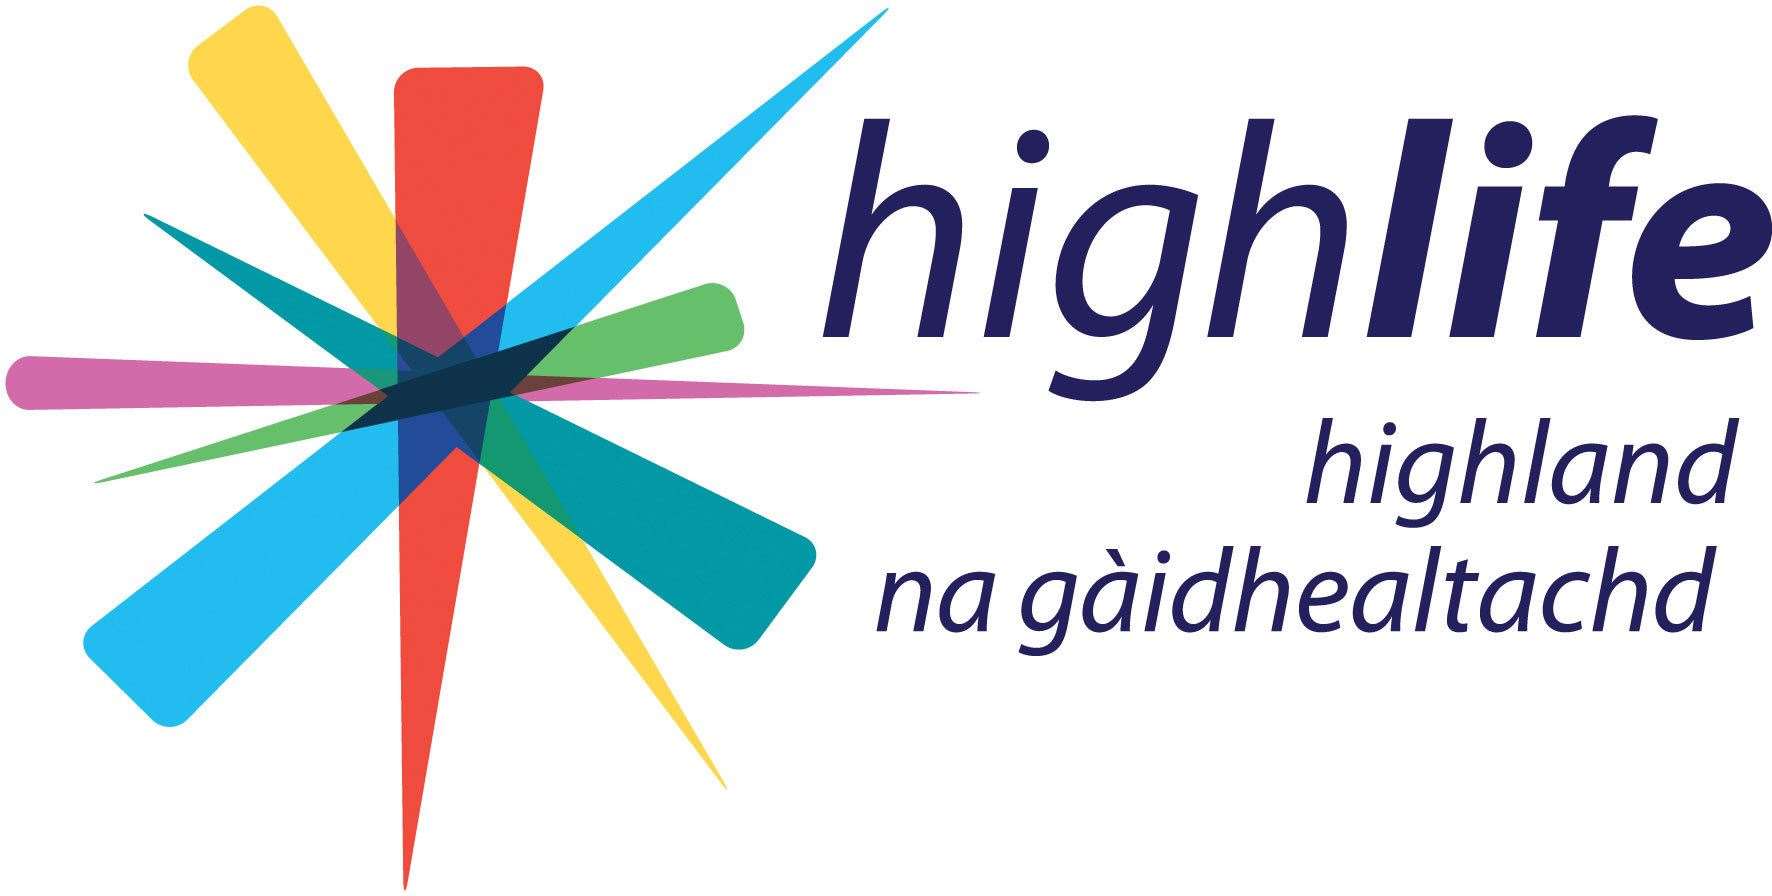 High Life Highland are recruiting.